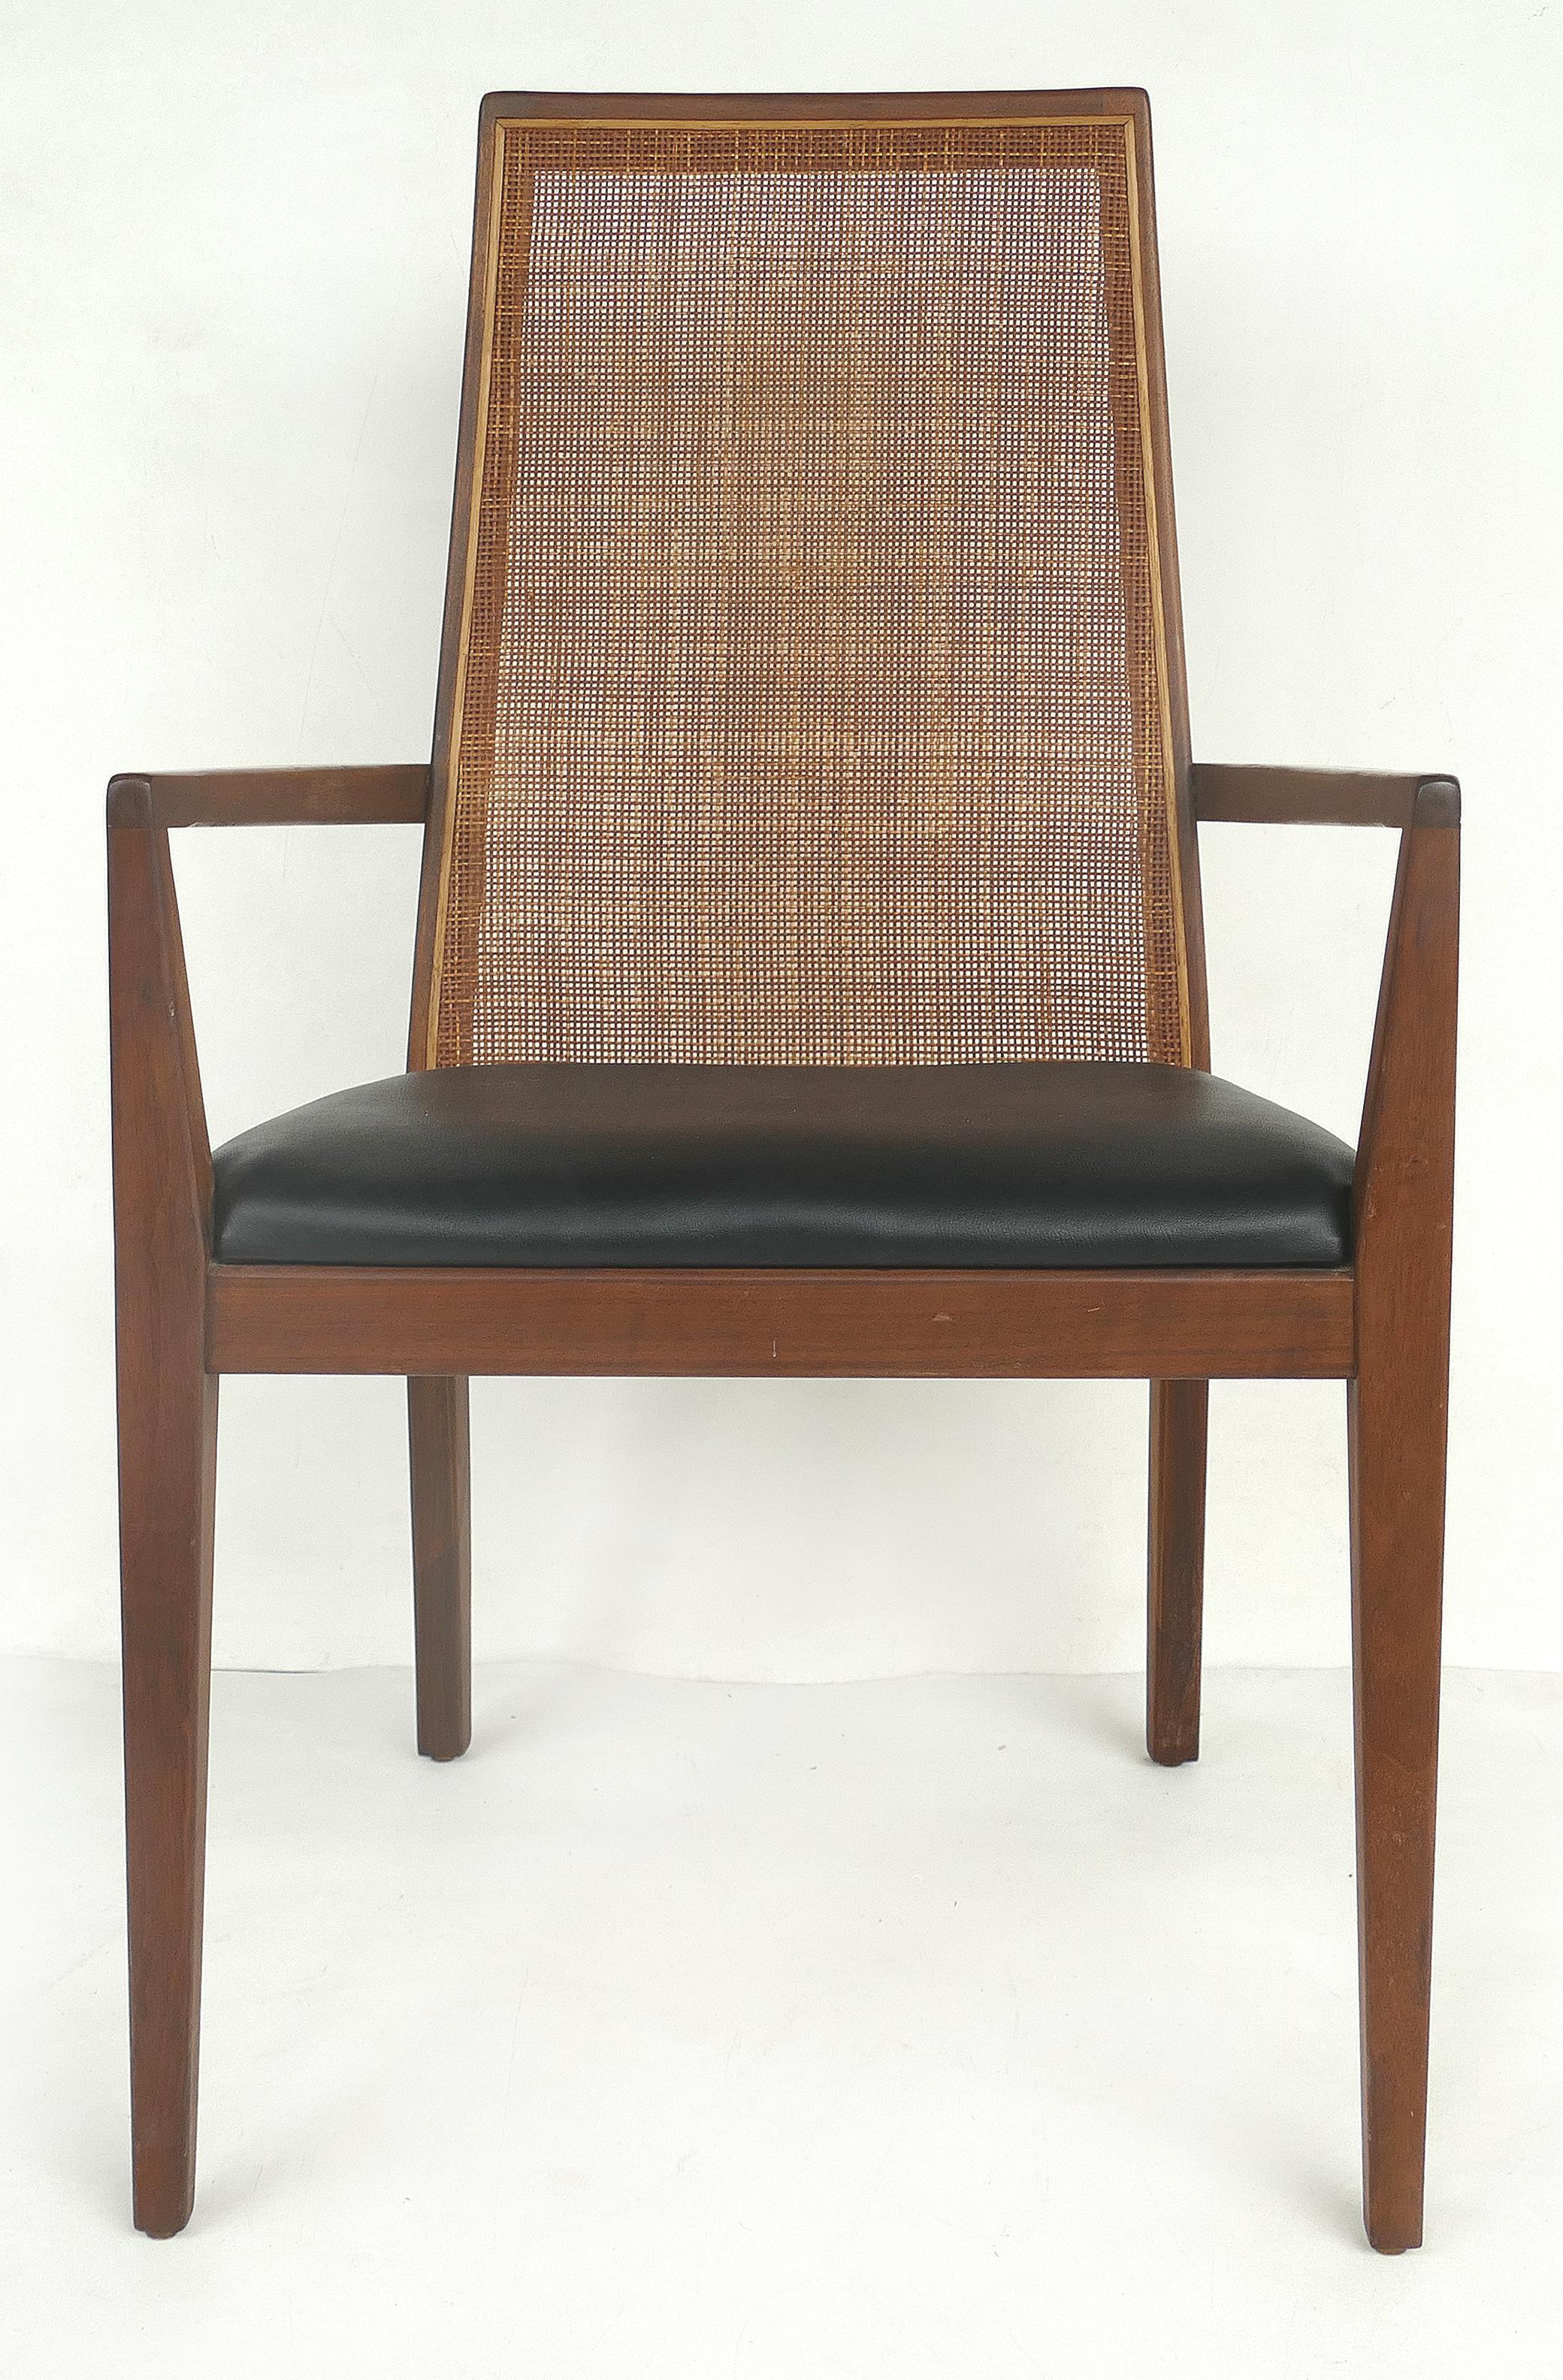 Foster-McDavid Mid-Century Modern dining table set with six caned back chairs

Offered for sale is a Mid-Century Modern mahogany dining table with six caned back chairs by Foster McDavid Furniture of Tampa, Florida. This wonderful table can be